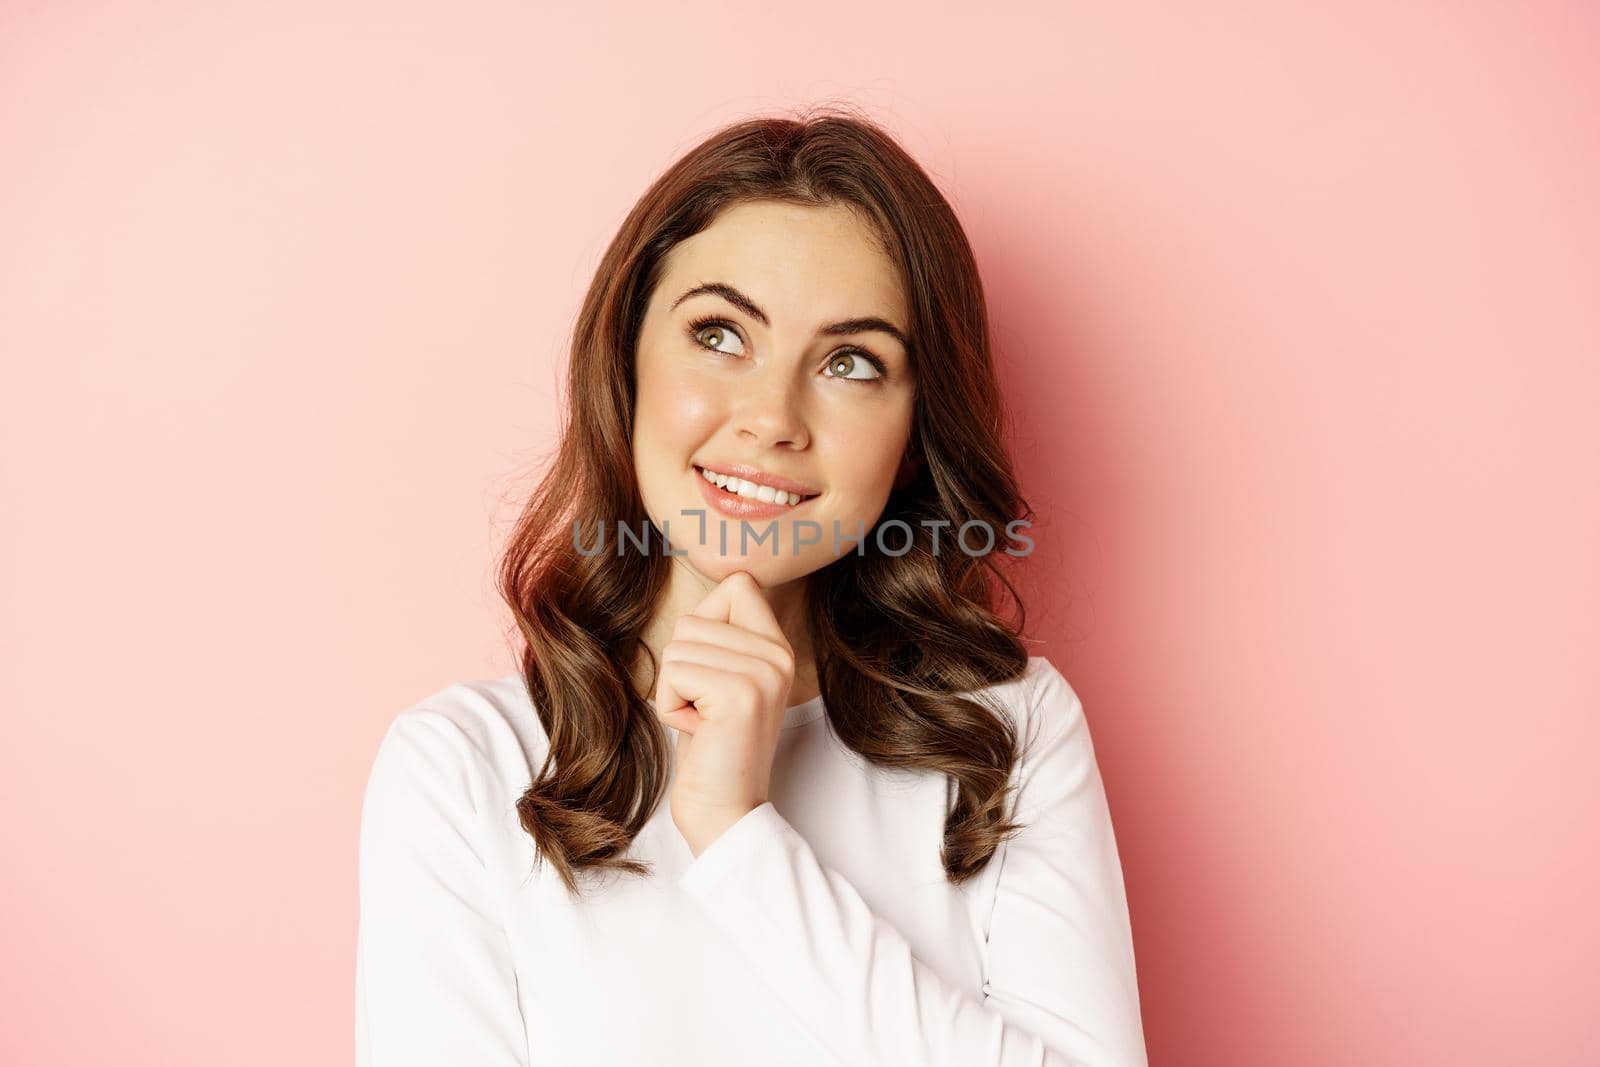 Close up portrait of coquettish smiling woman, glamour girl thinking, looking thoughtful, standing over pink background.